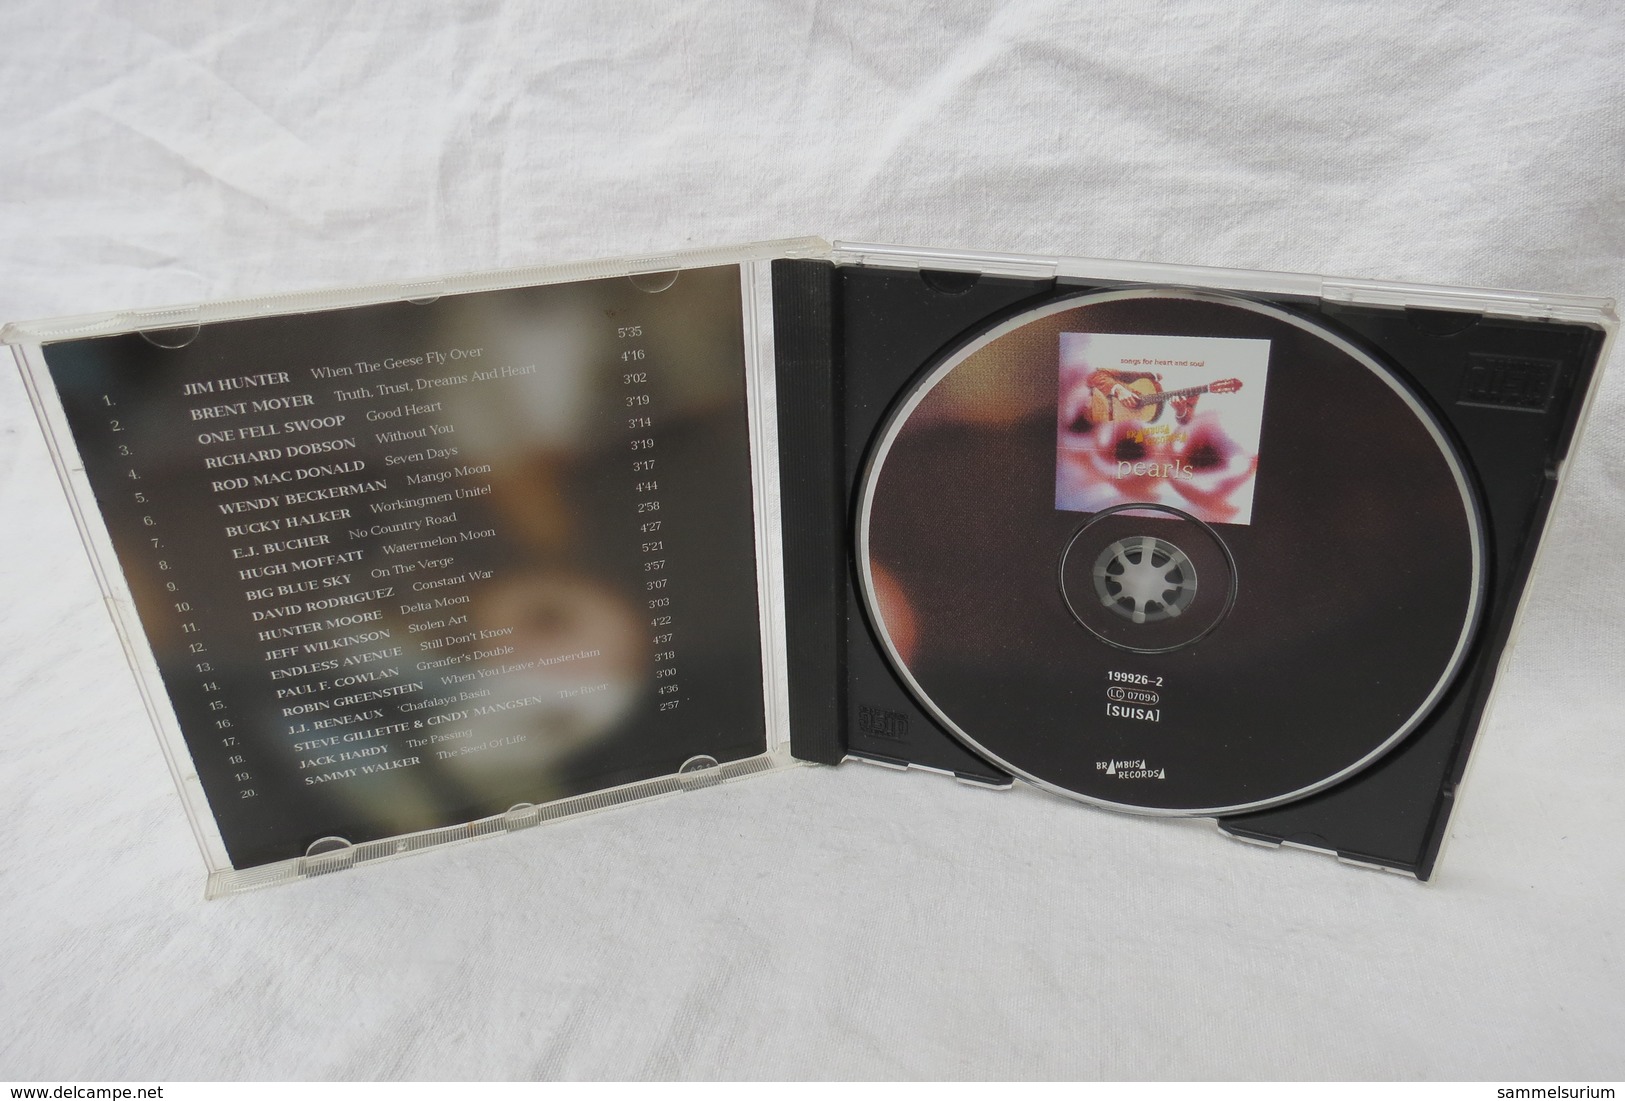 CD "Pearls" Vol.1, Songs For Heart And Soul - Soul - R&B